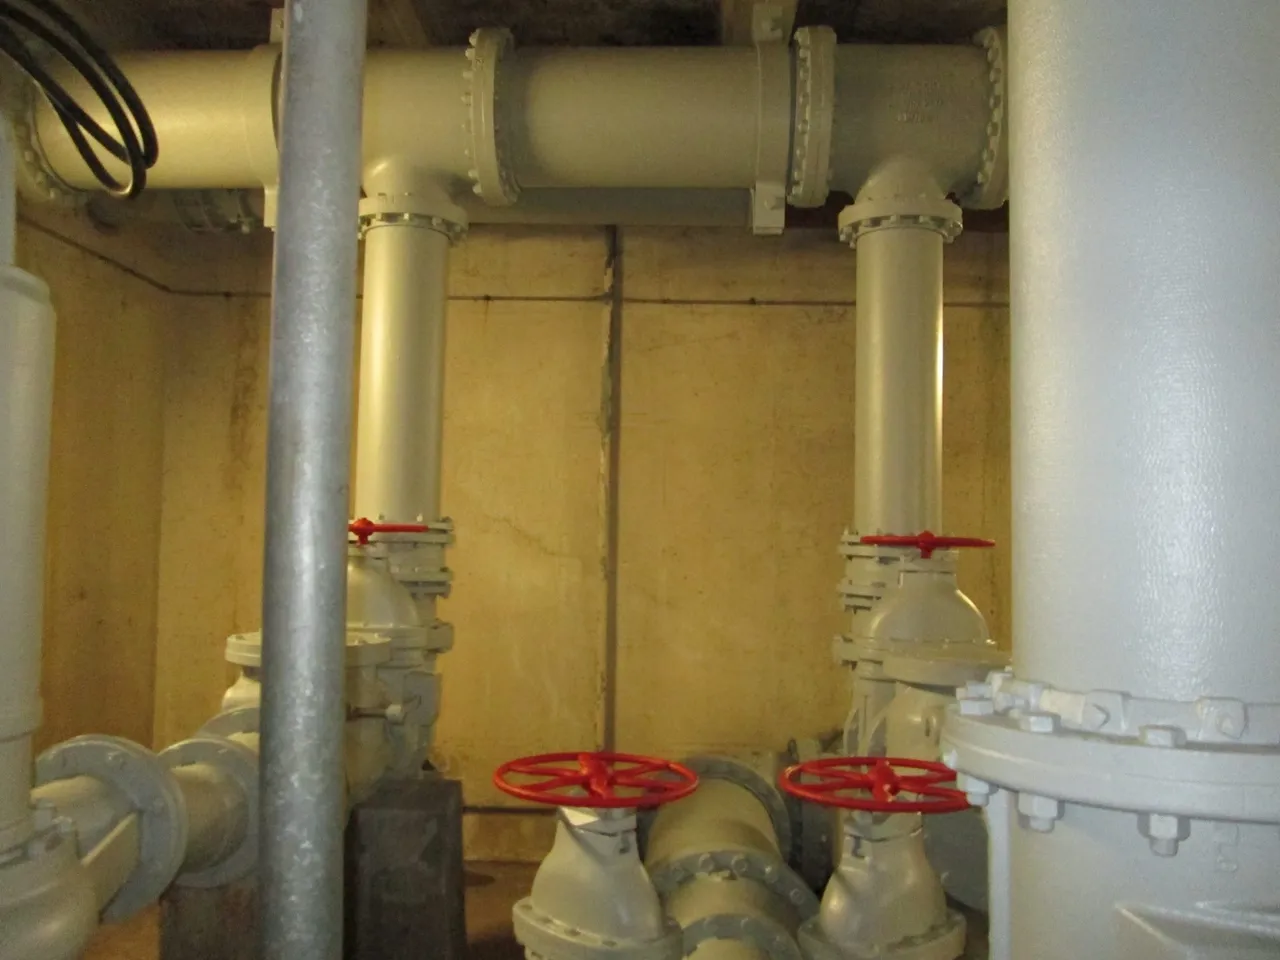 A view of pipes and valves in an industrial setting.